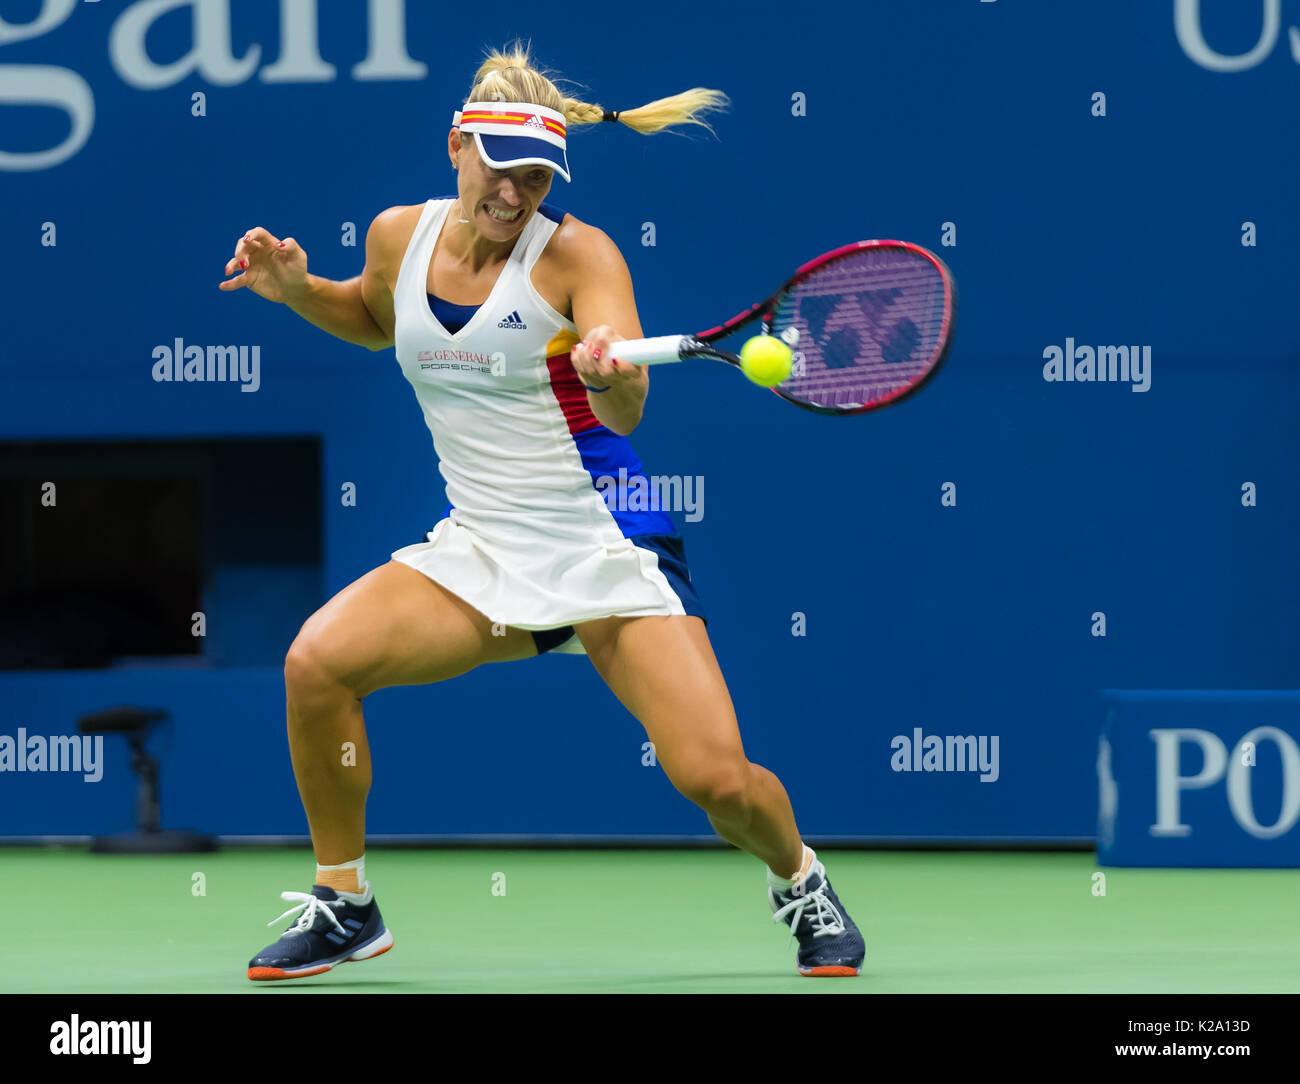 New York City, United States. 29 August, 2017. Angelique Kerber of Germany  at the 2017 US Open Grand Slam tennis tournament © Jimmie48  Photography/Alamy Live News Stock Photo - Alamy